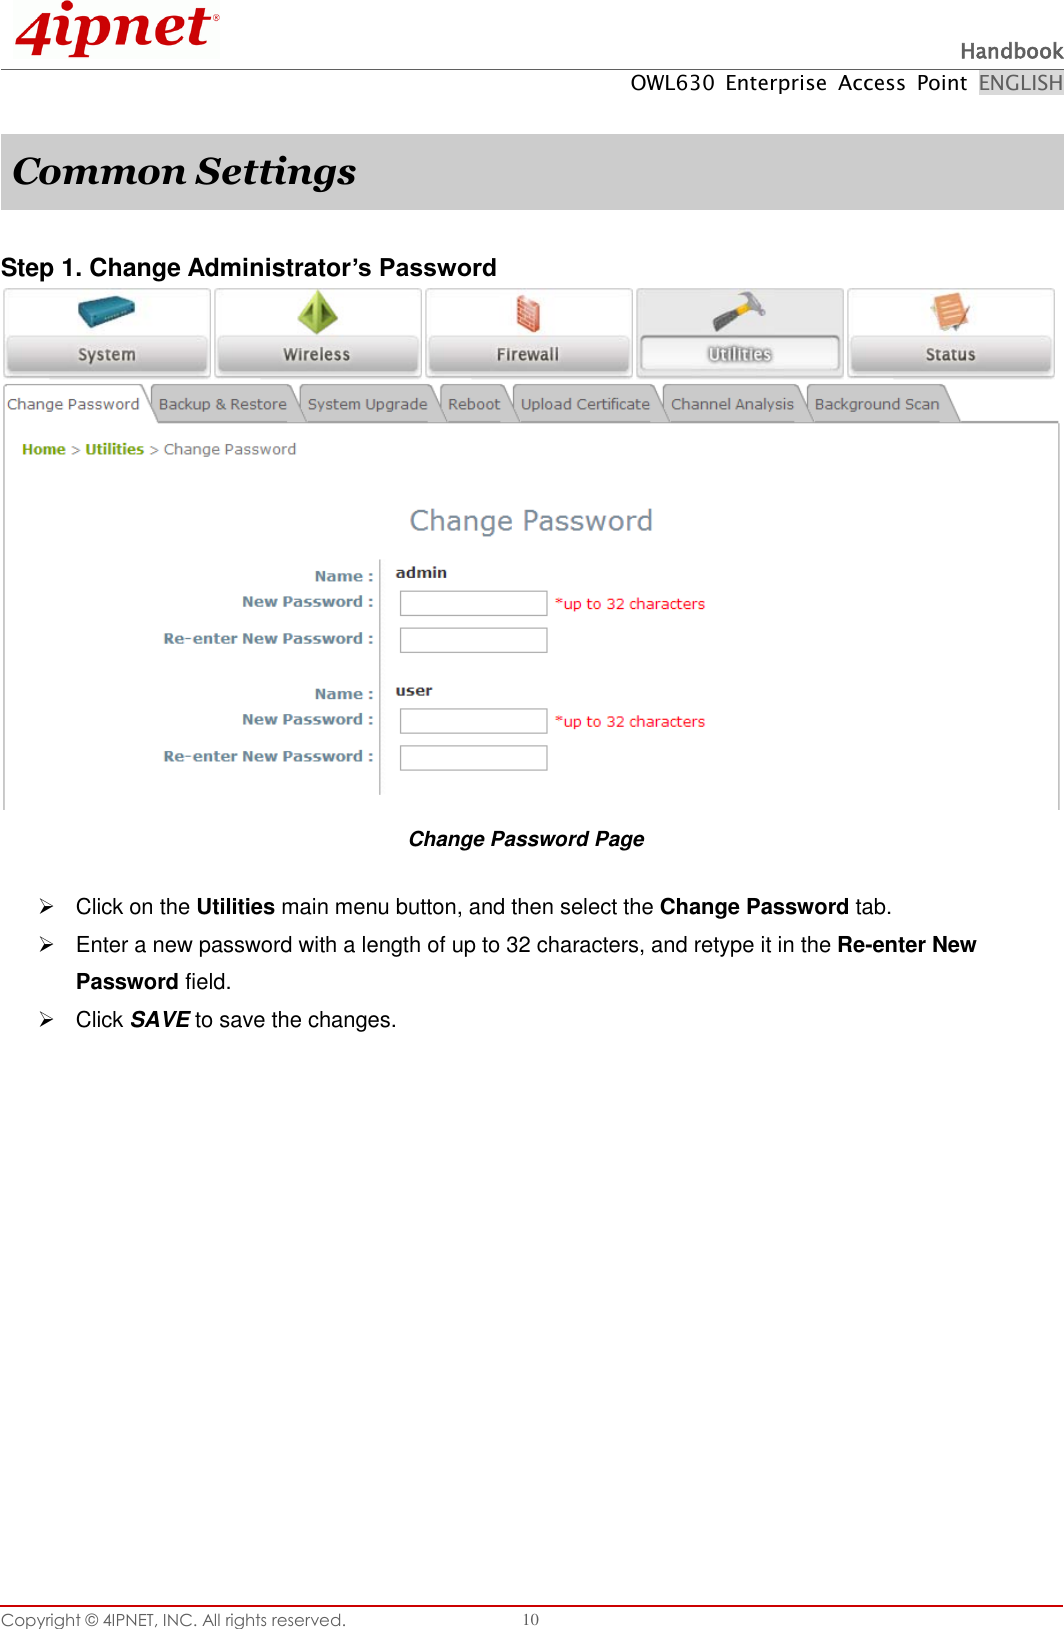  Handbook OWL630  Enterprise  Access  Point  ENGLISH Copyright ©  4IPNET, INC. All rights reserved.   10  Common Settings  Step 1. Change Administrator’s Password  Change Password Page   Click on the Utilities main menu button, and then select the Change Password tab.   Enter a new password with a length of up to 32 characters, and retype it in the Re-enter New Password field.   Click SAVE to save the changes.   